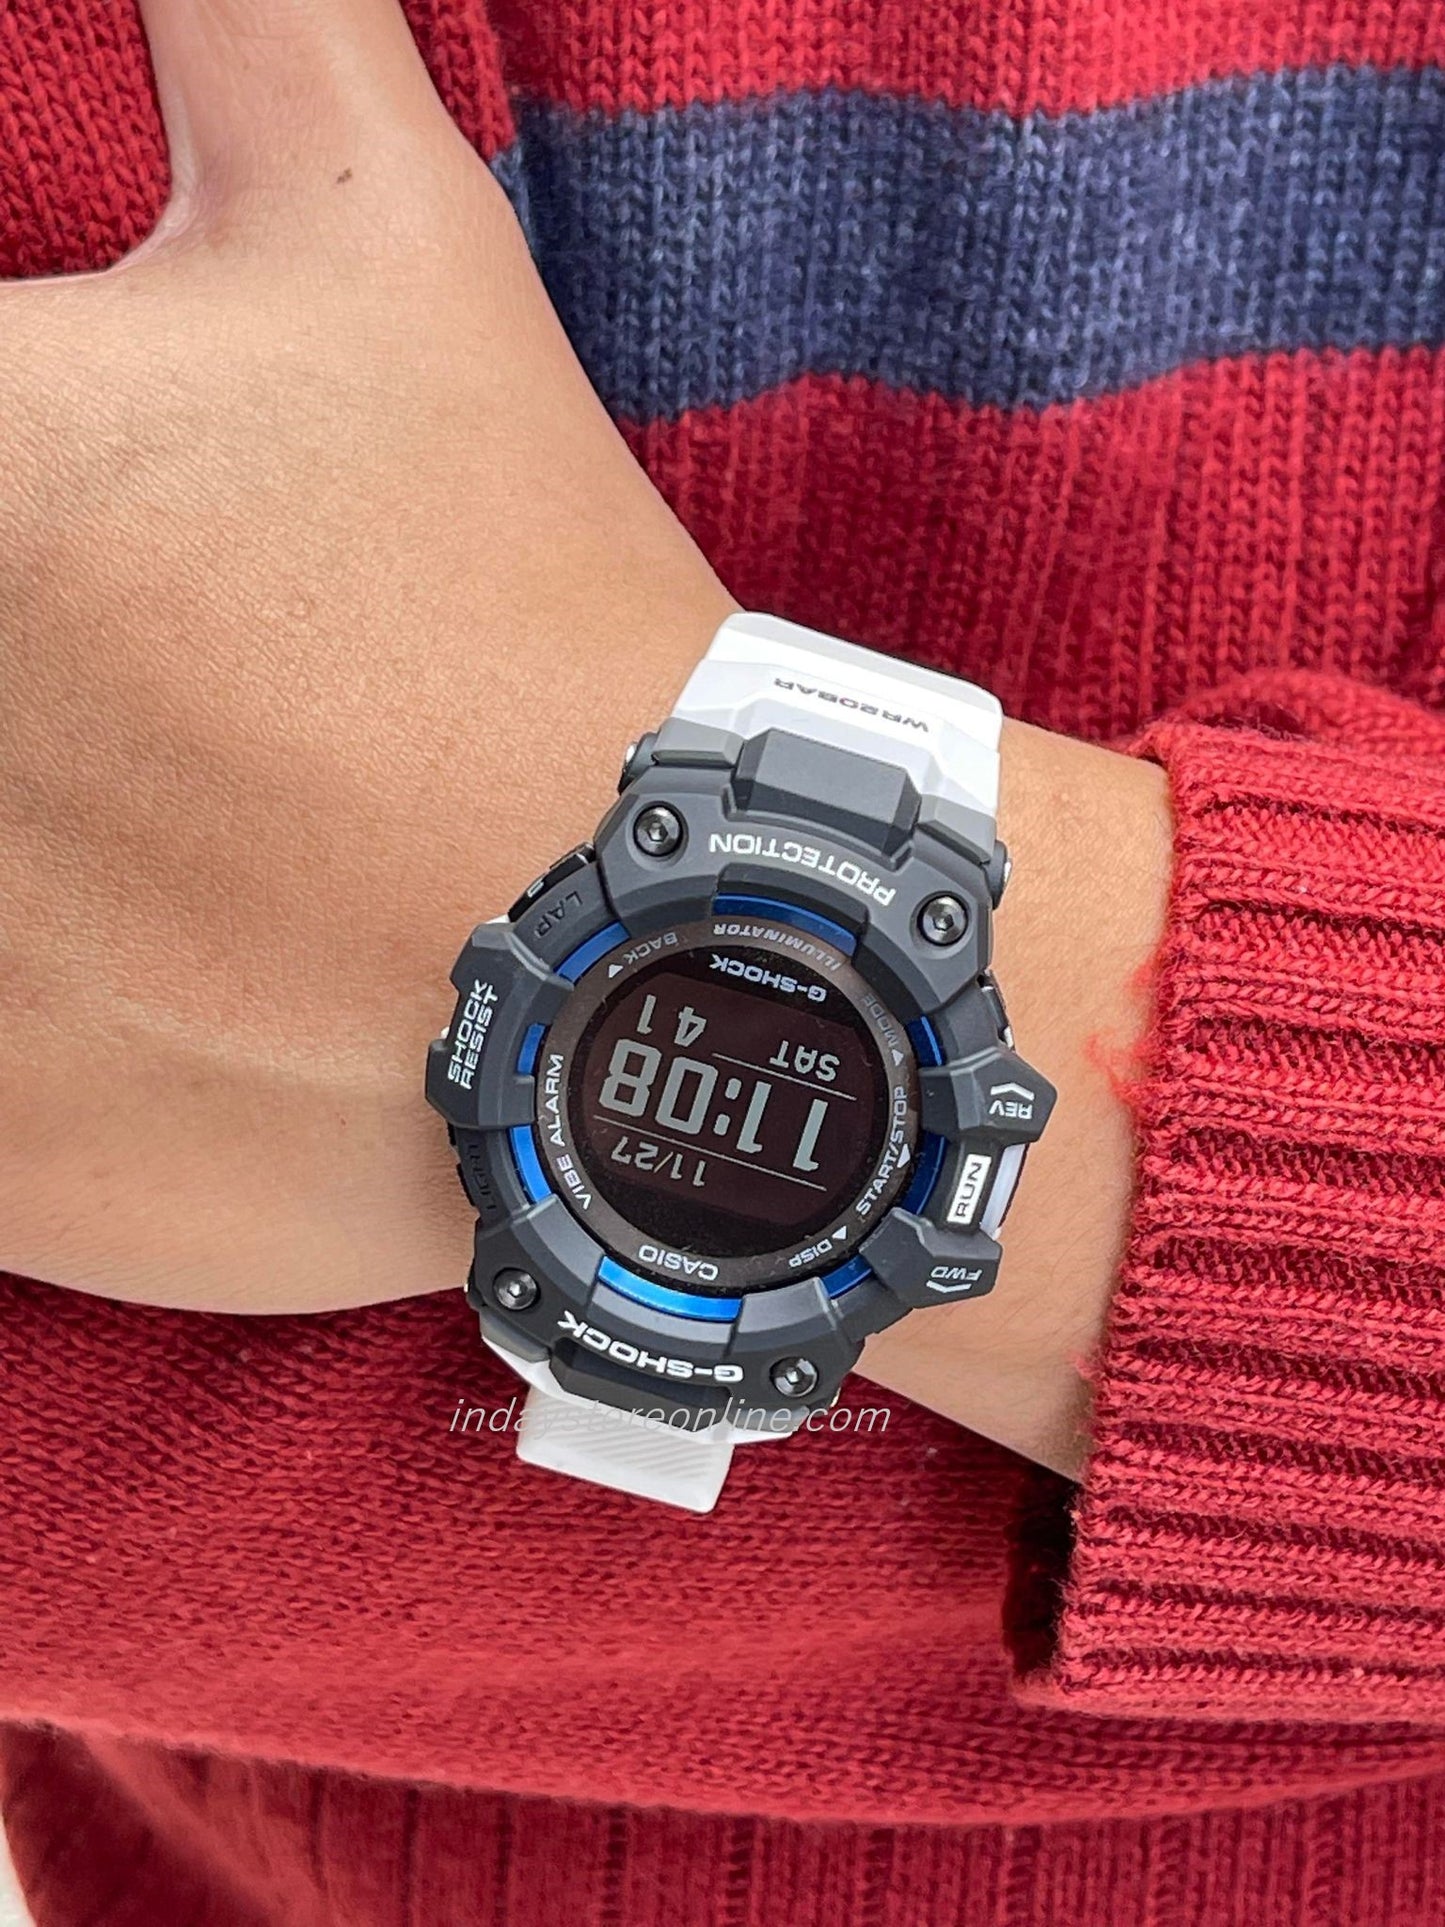 Casio G-Shock Men's Watch GBD-100-1A7  G-Squad Digital GBD-100 Series Shock Resistant Mobile link (Wireless linking using Bluetooth®)